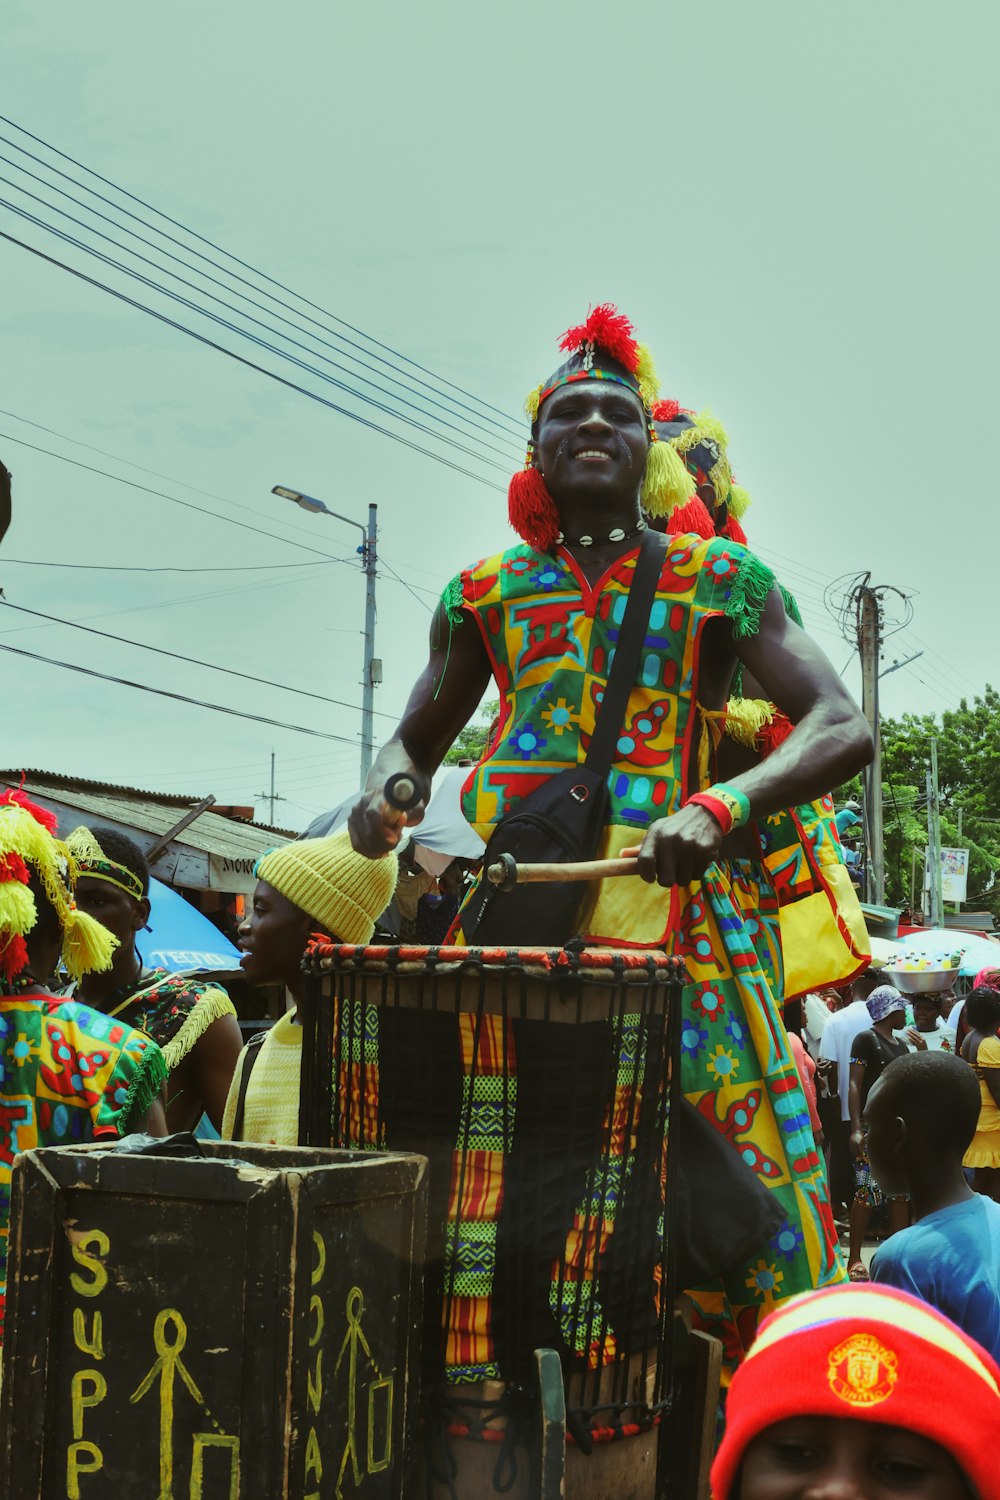 a man in a colorful costume riding on a cart